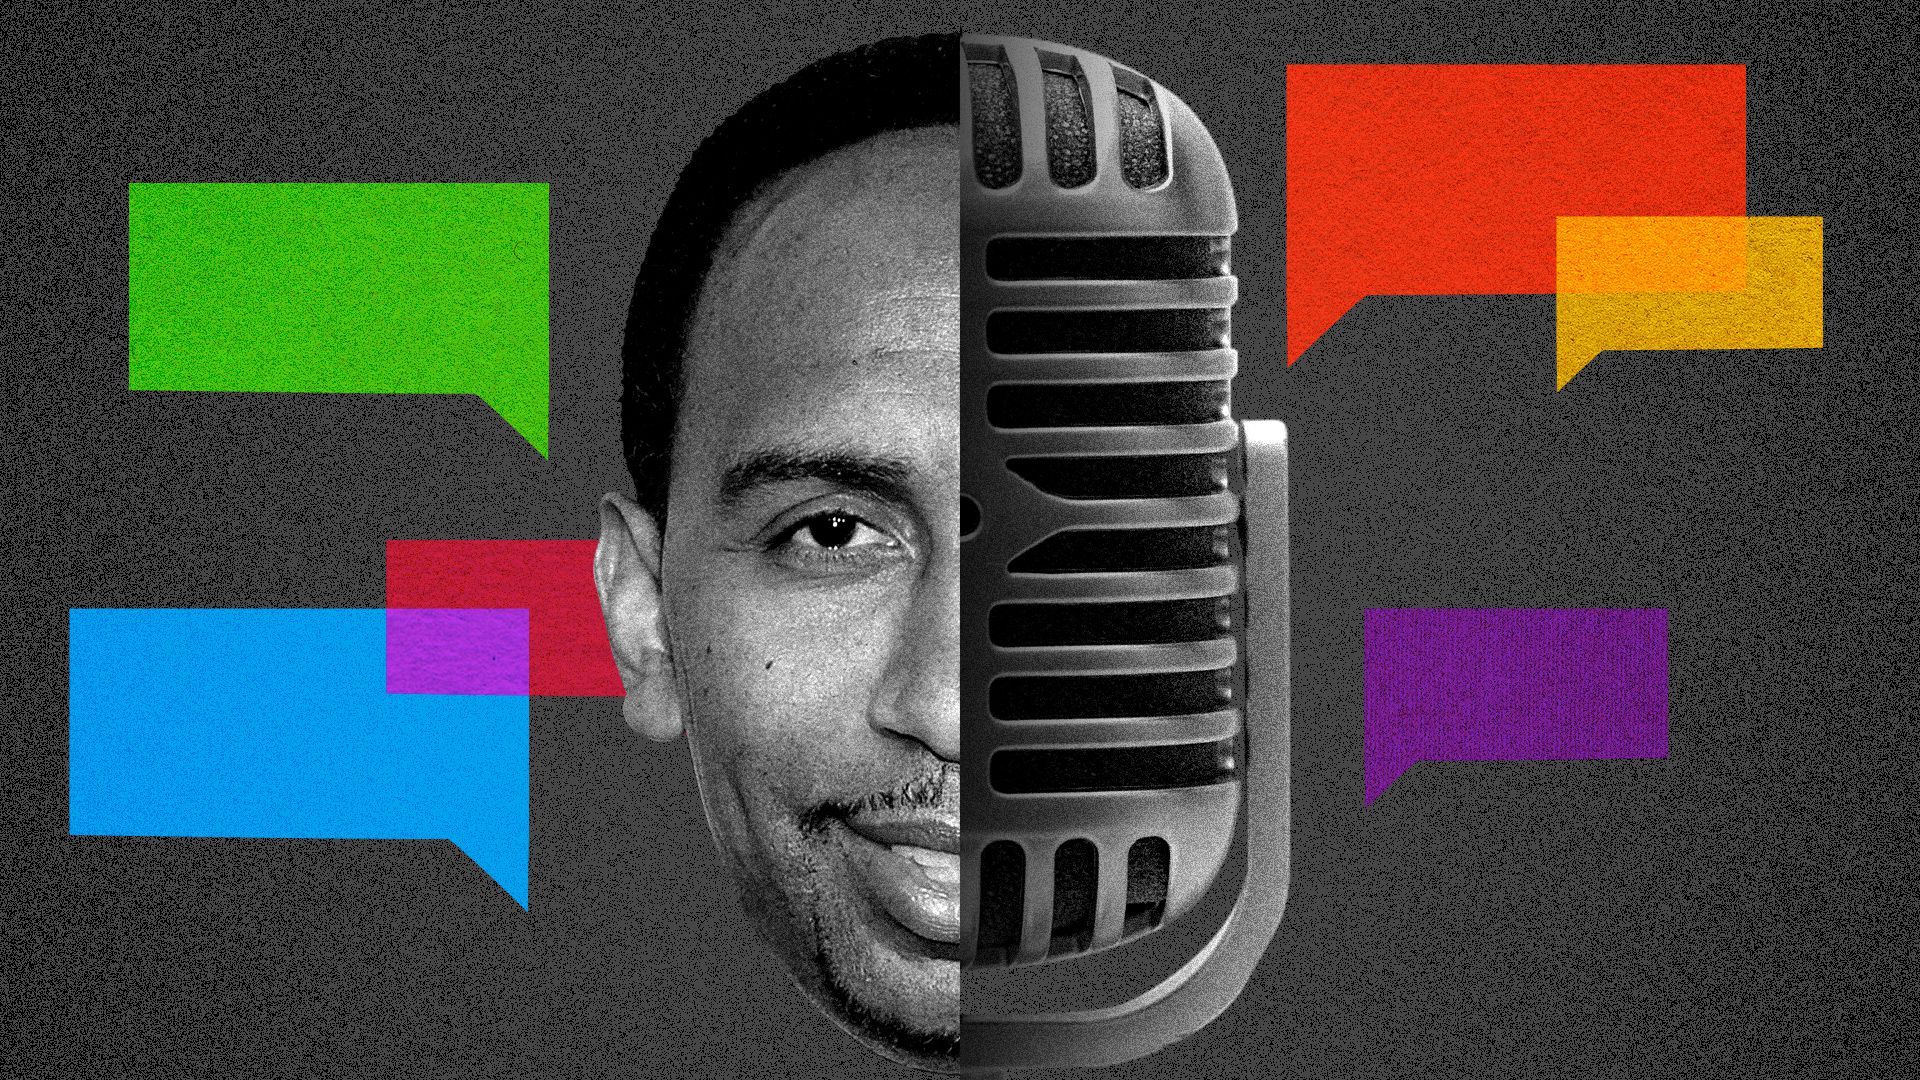 Photo illustration of Stephen A. Smith and an old-fashioned microphone surrounded by speech bubbles